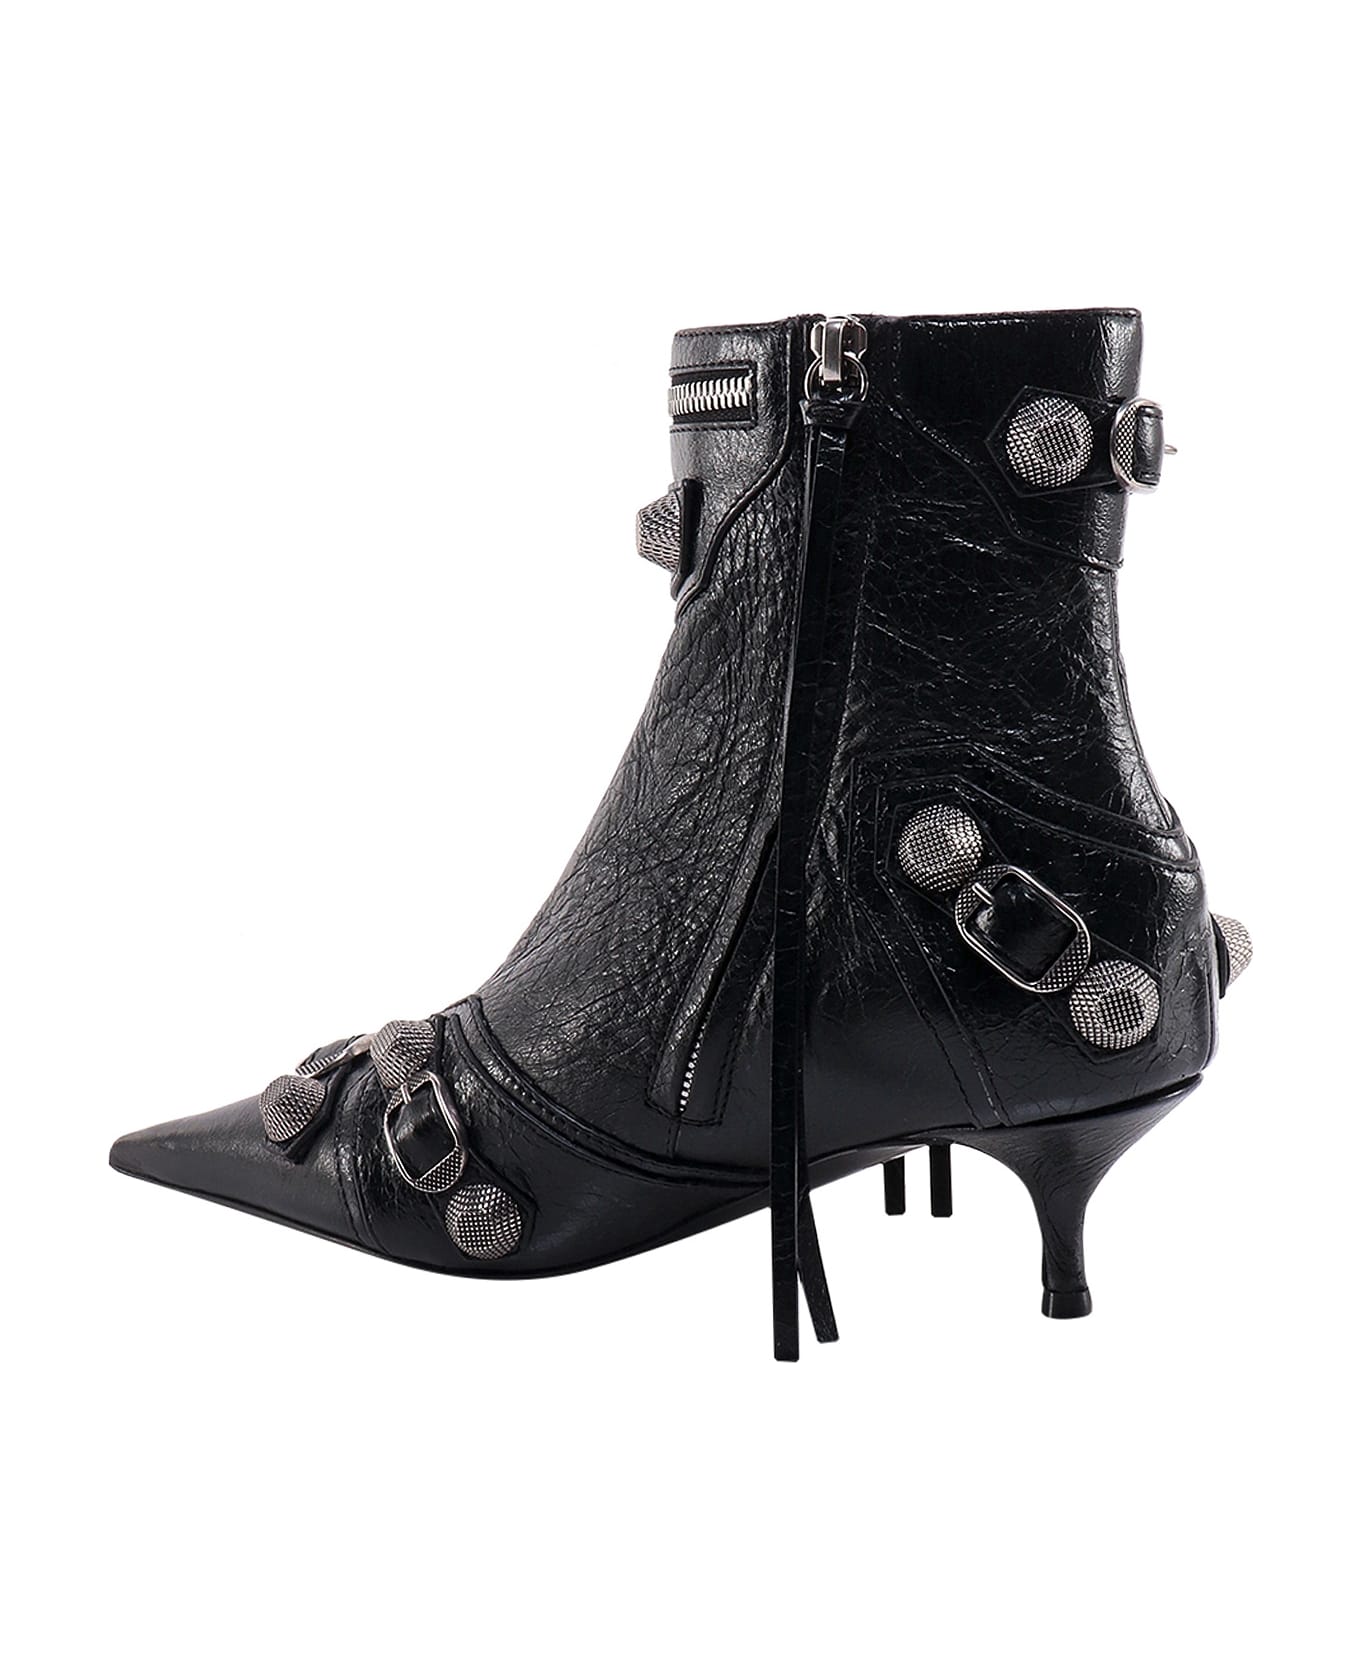 Balenciaga Low Heels Ankle Boots In Black Leather - Black ブーツ